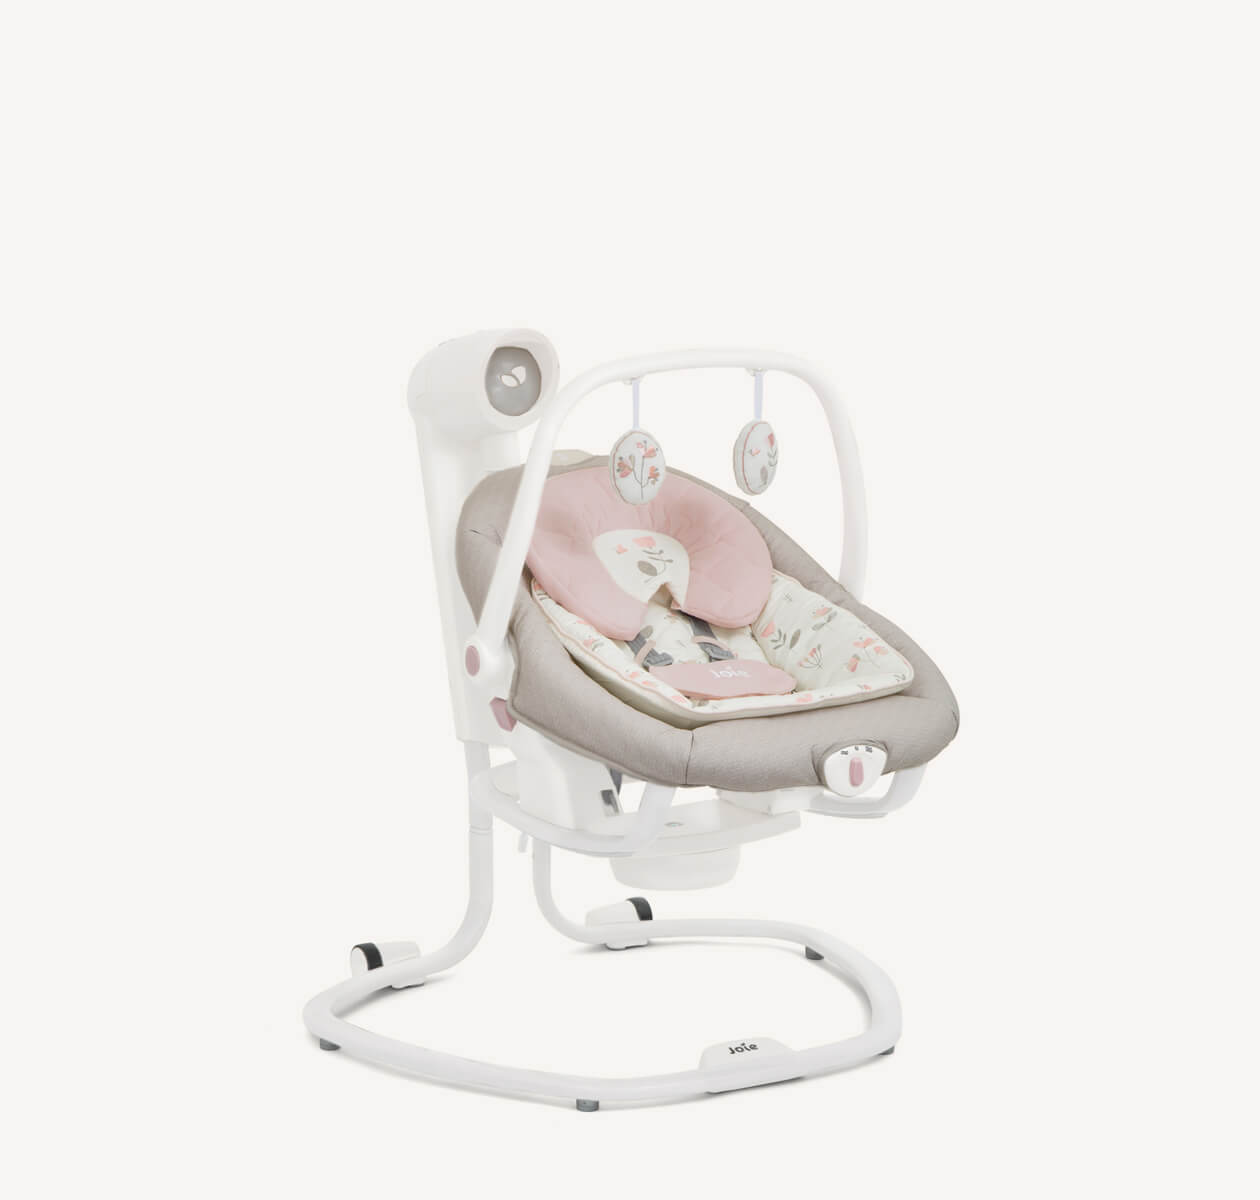 Pink and grey flower patterned serina 2in1 Joie swing positioned at a right angle.